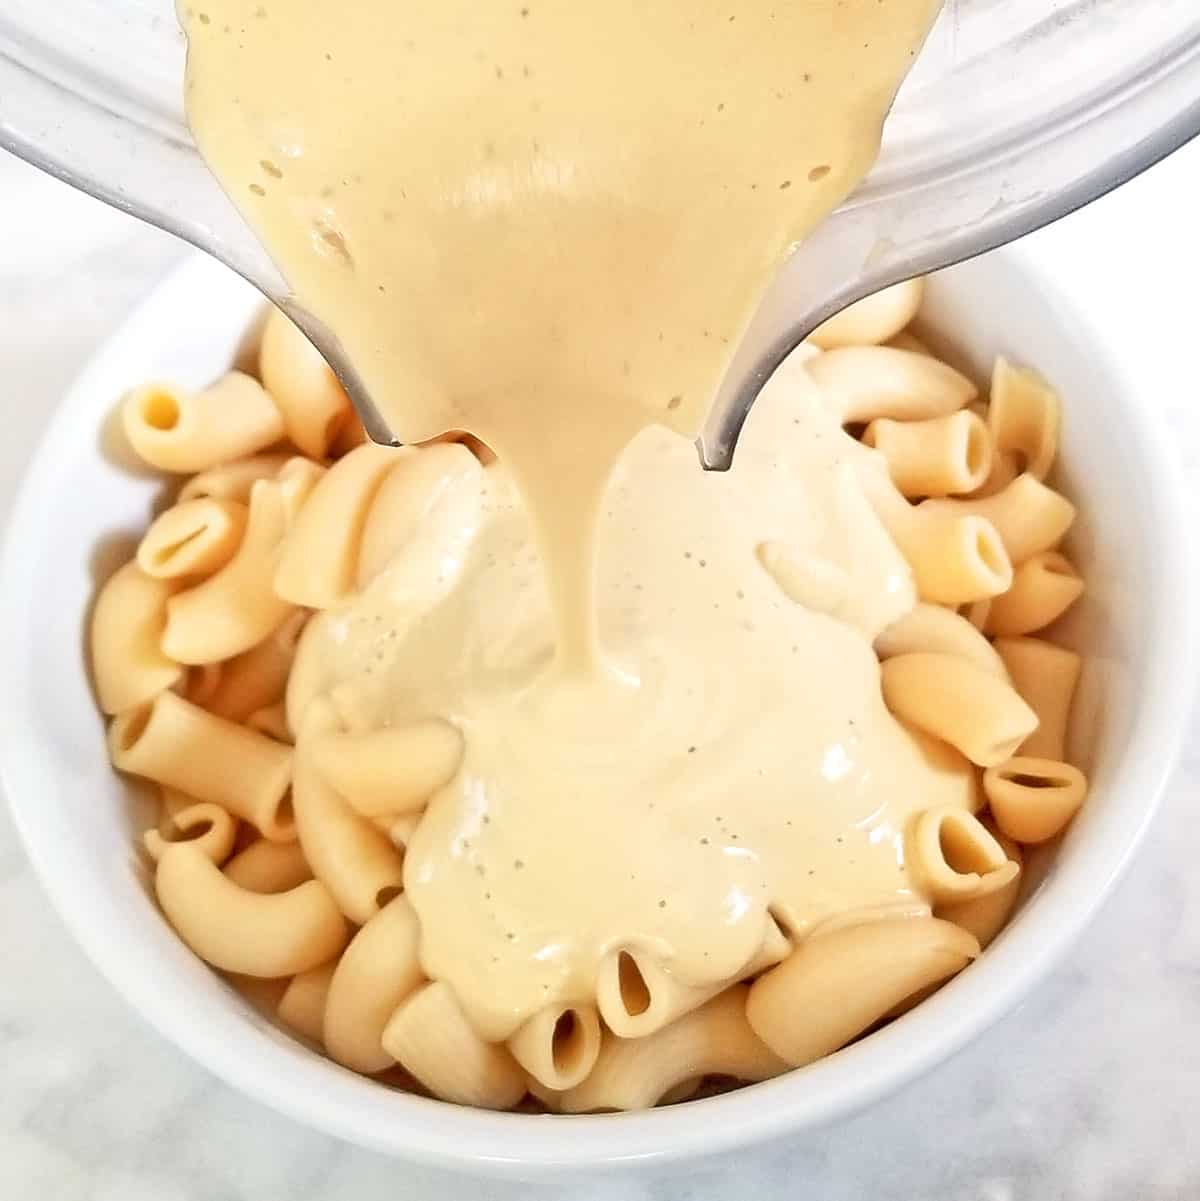 vegan cashew cheese sauce being poured over cooked macaroni noodles.